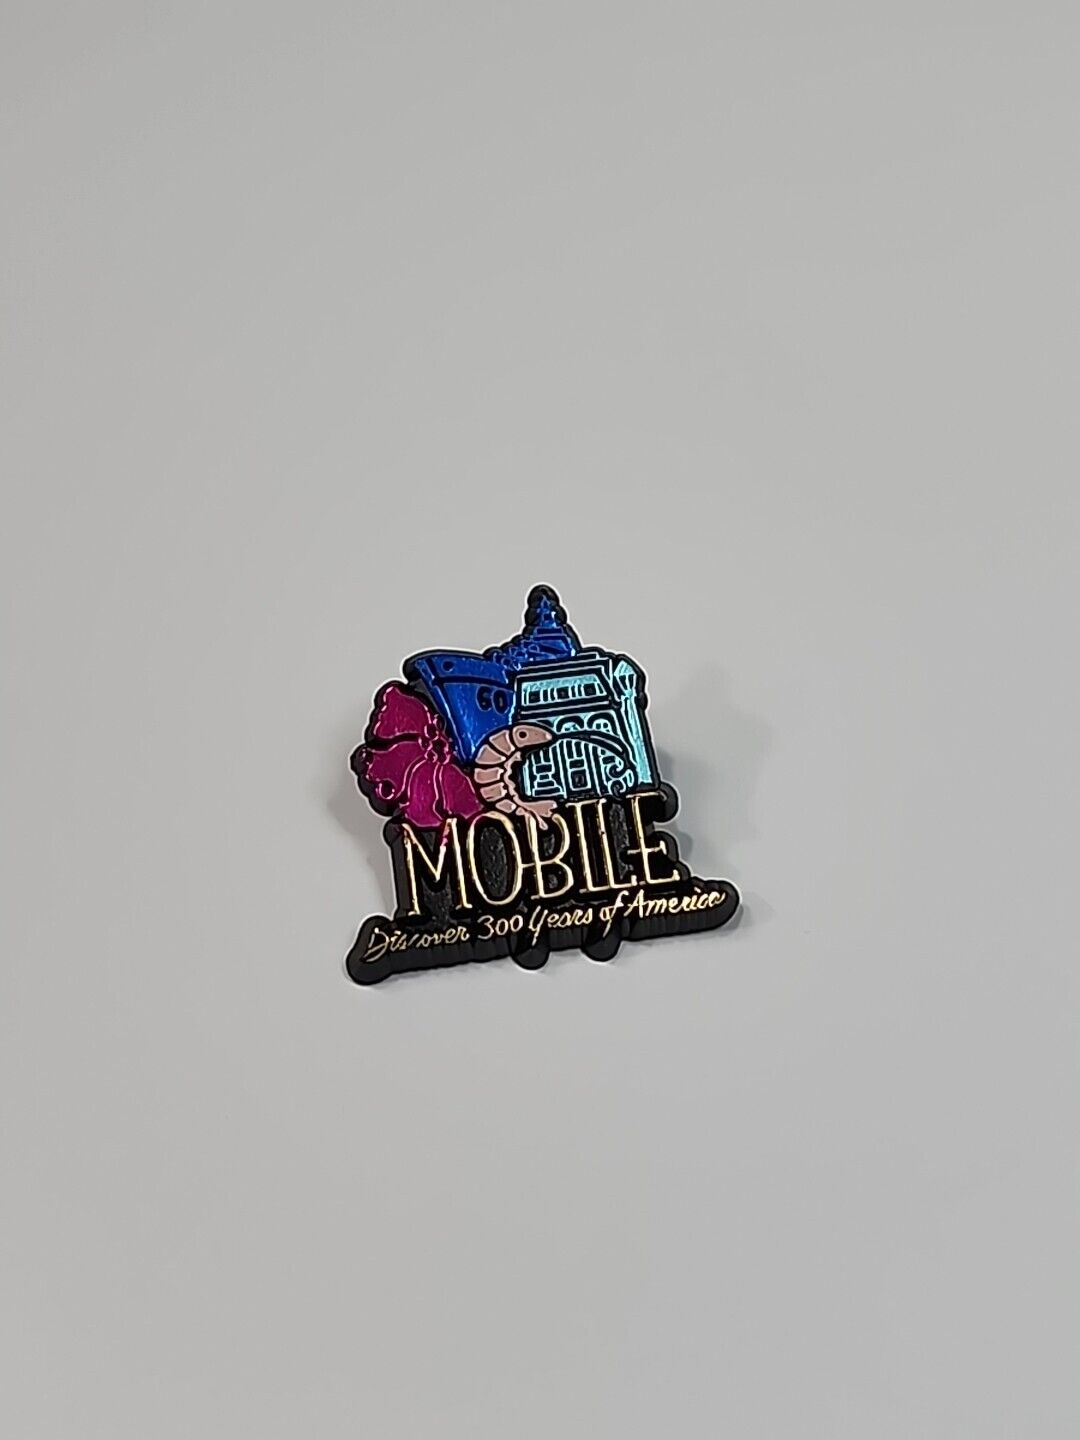 PLASTIC Mobile Alabama Travel Souvenir Pin Discover 300 Years of America